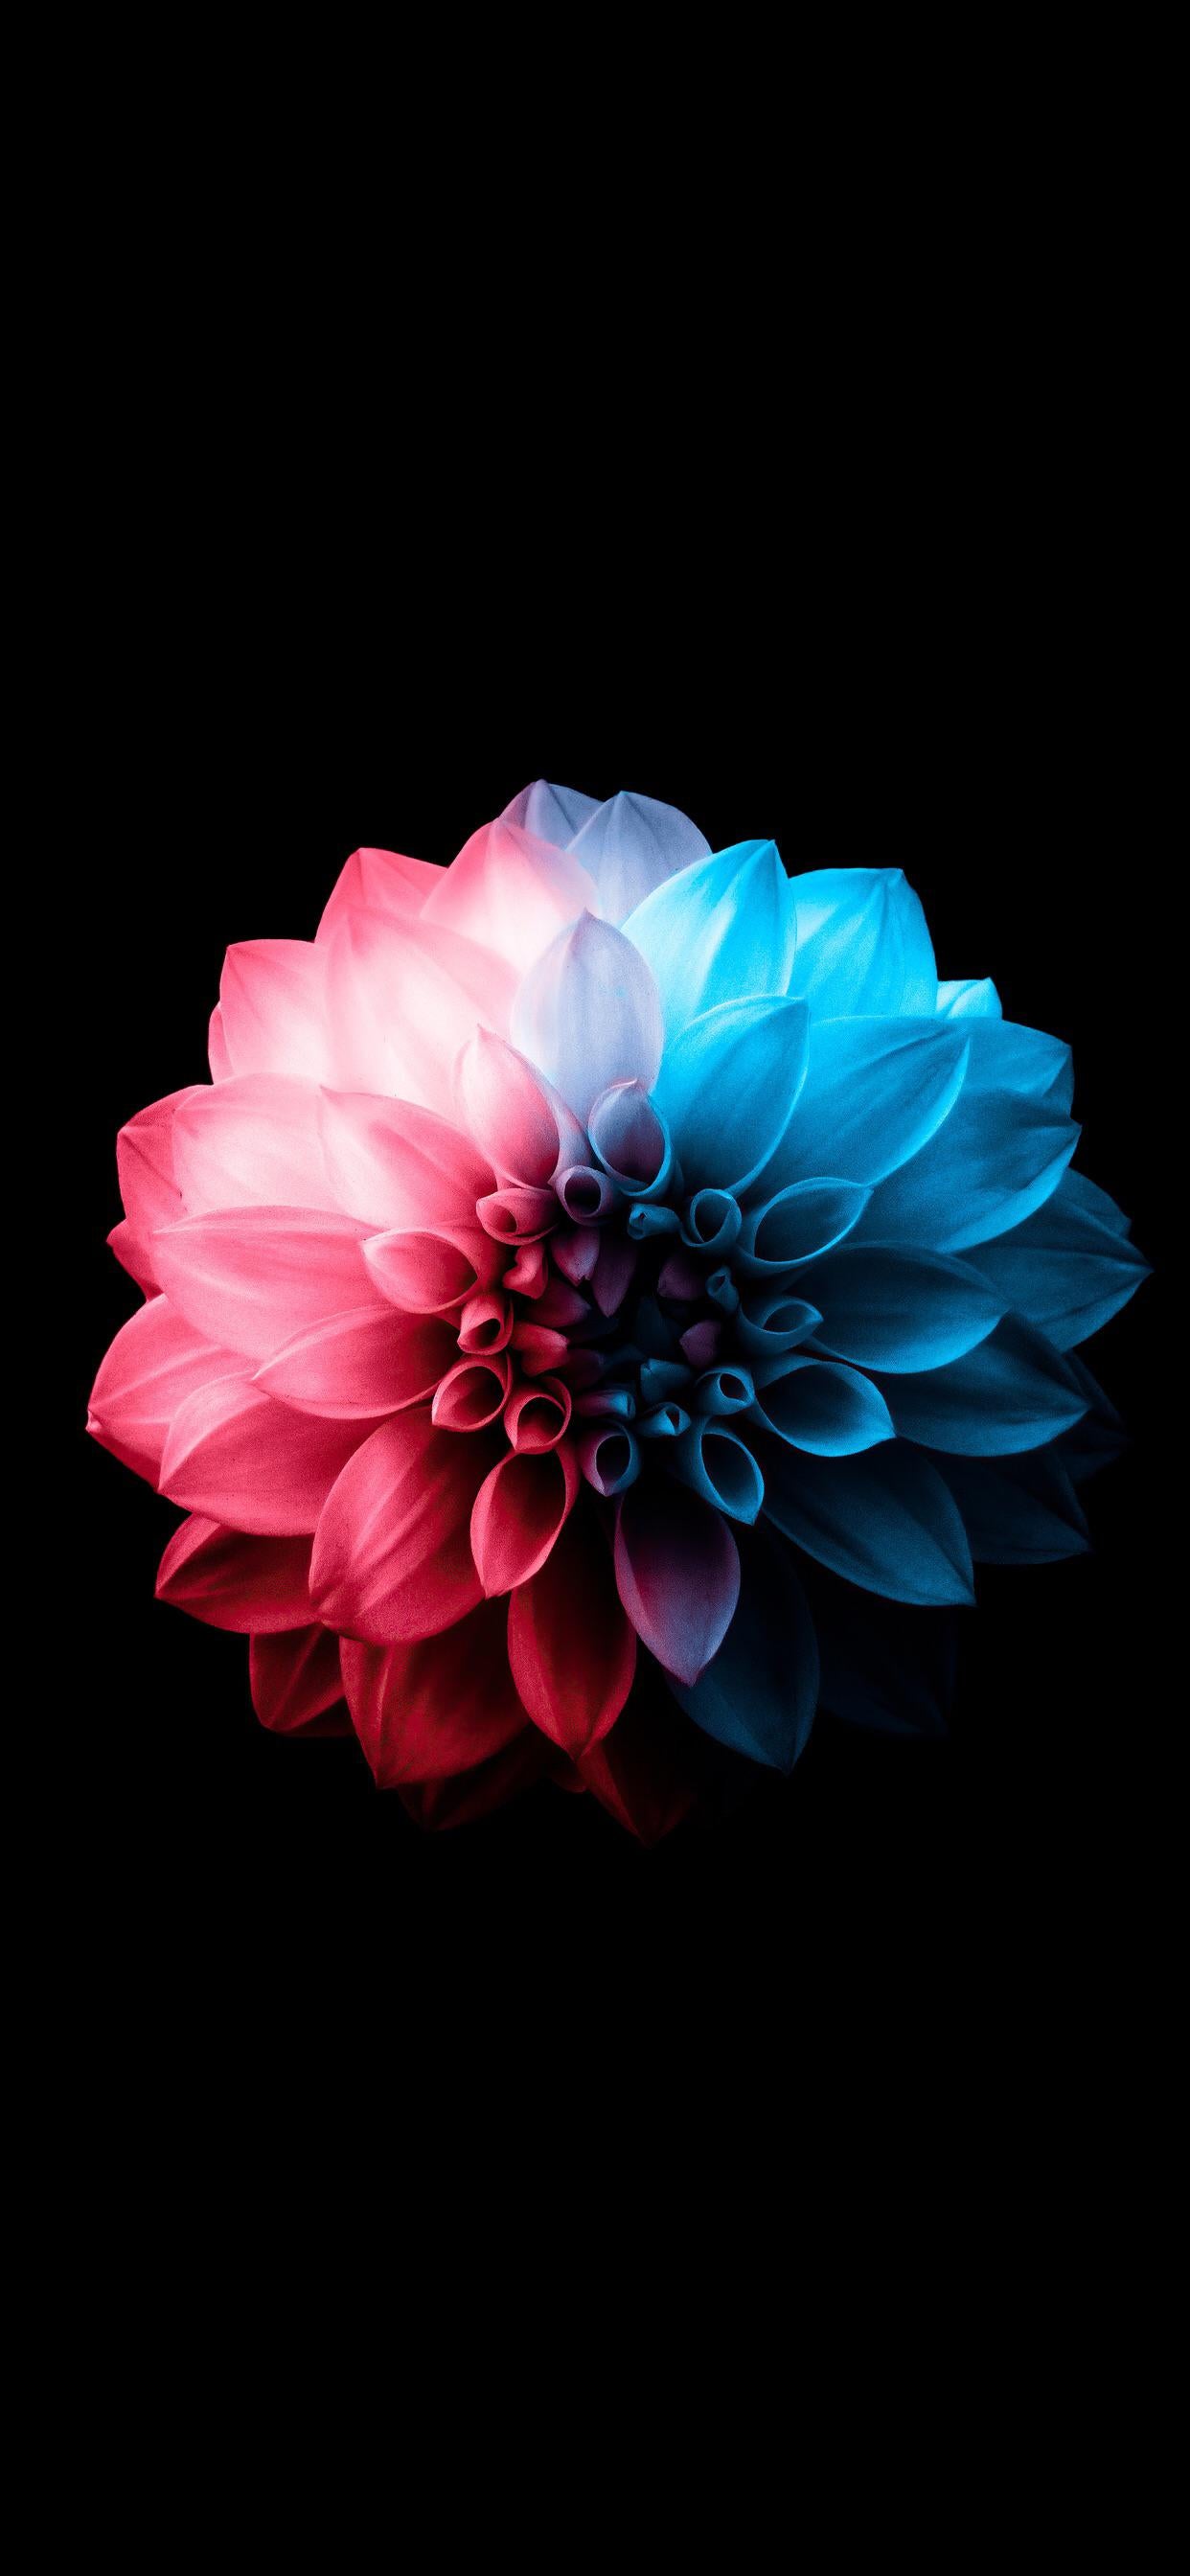 Download AMOLED Android Black Flower Wallpaper | Wallpapers.com